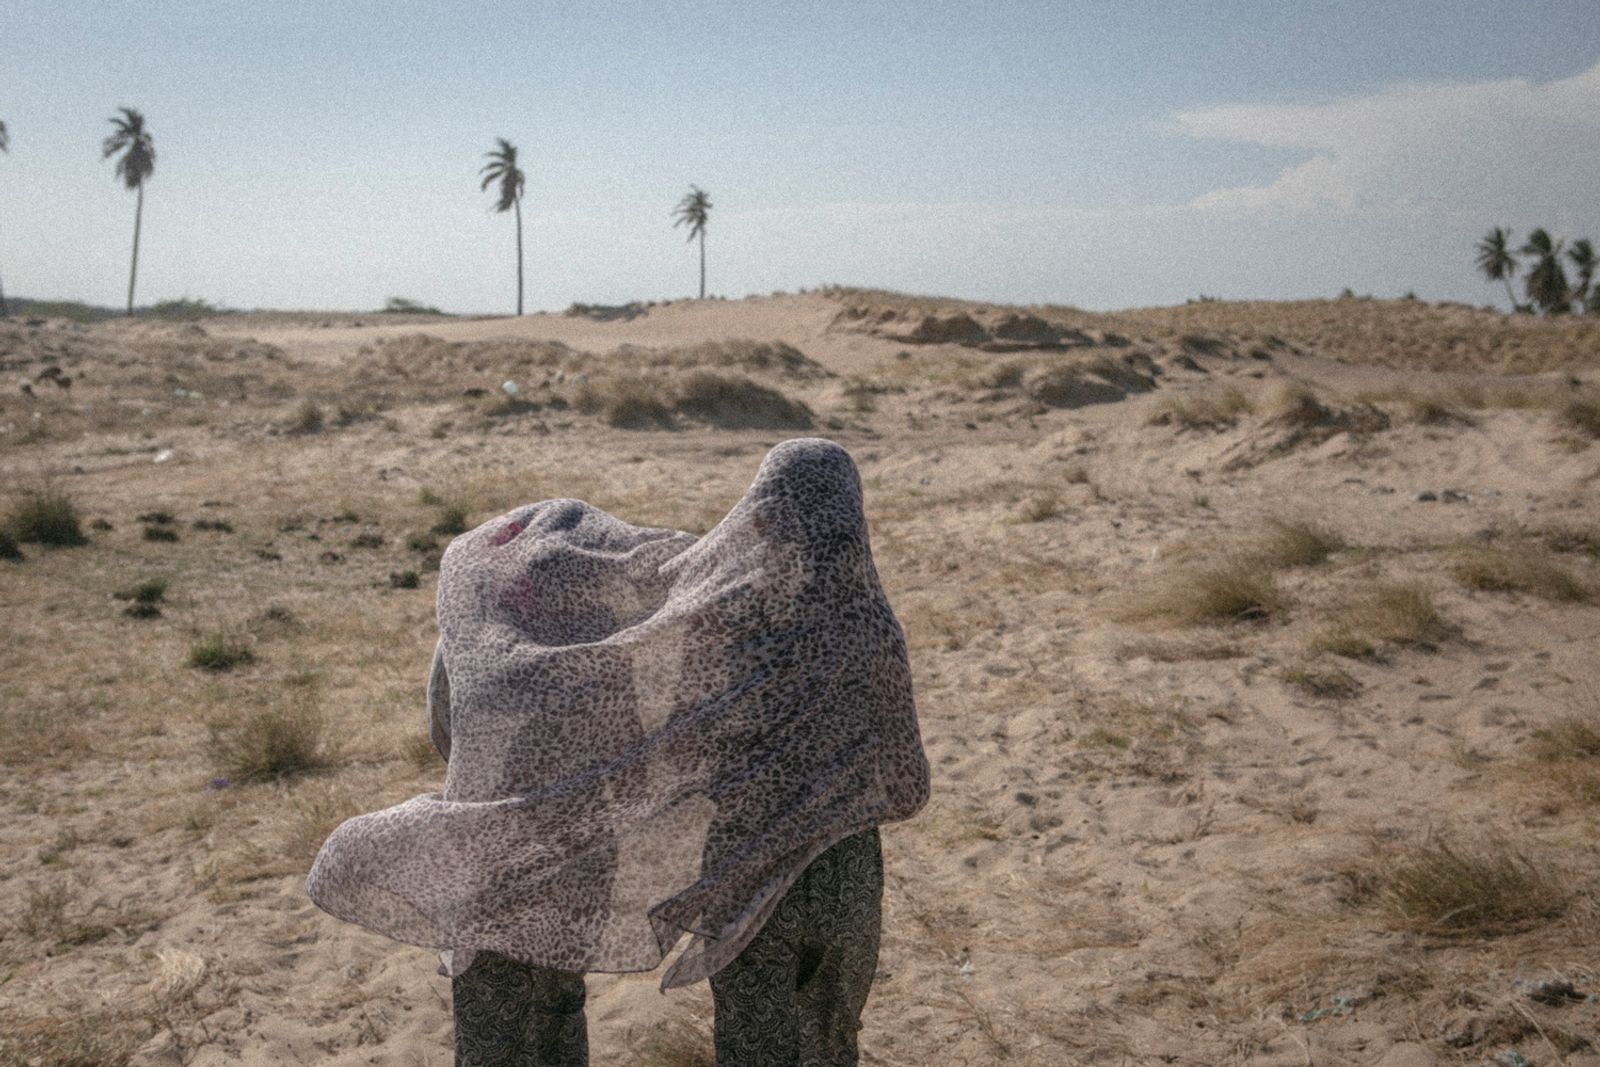 © Fabiola Ferrero - Two girls play with a scarf at Guajira desert, in the Venezuelan border with Colombia. Taken on February 2017.